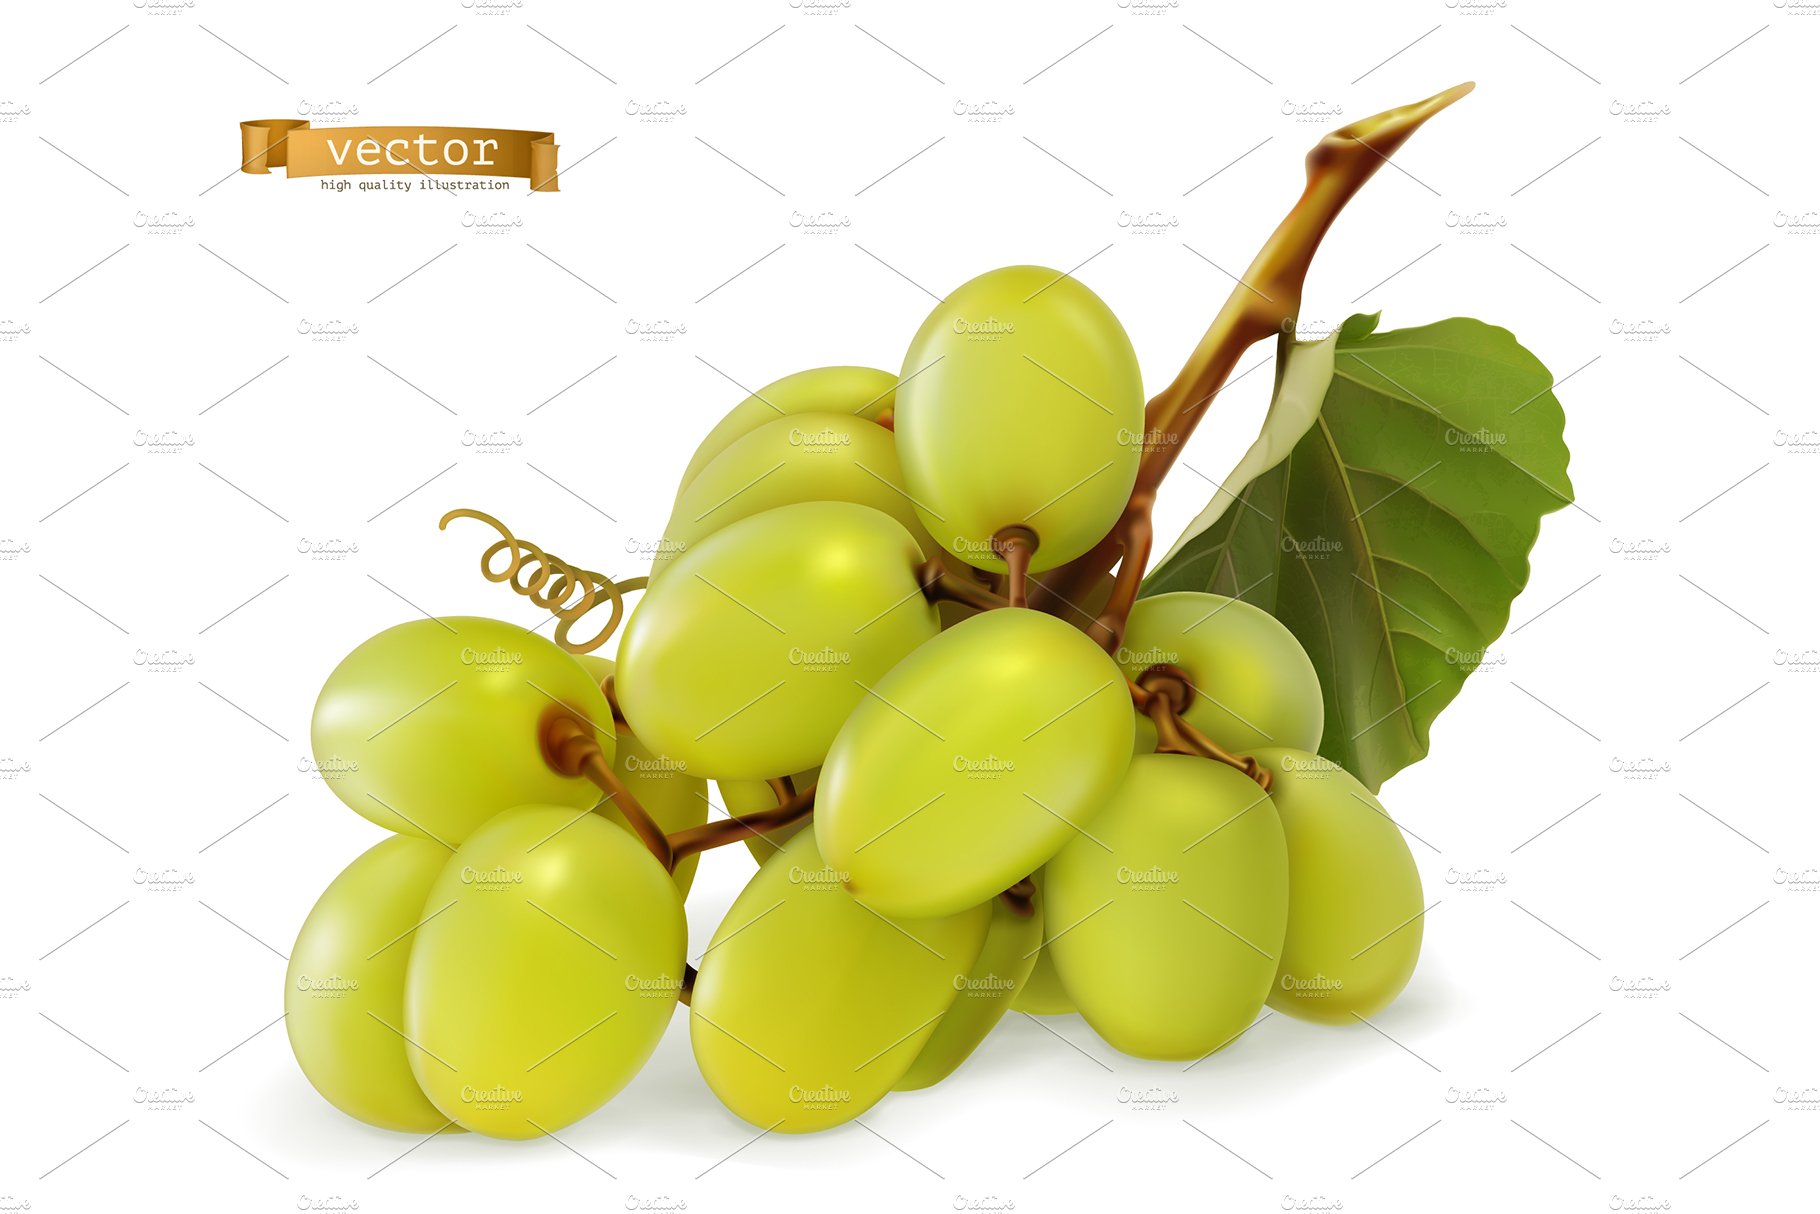 white grapes sweet wine grapes dessert grapes. fresh fruits vector icon 49